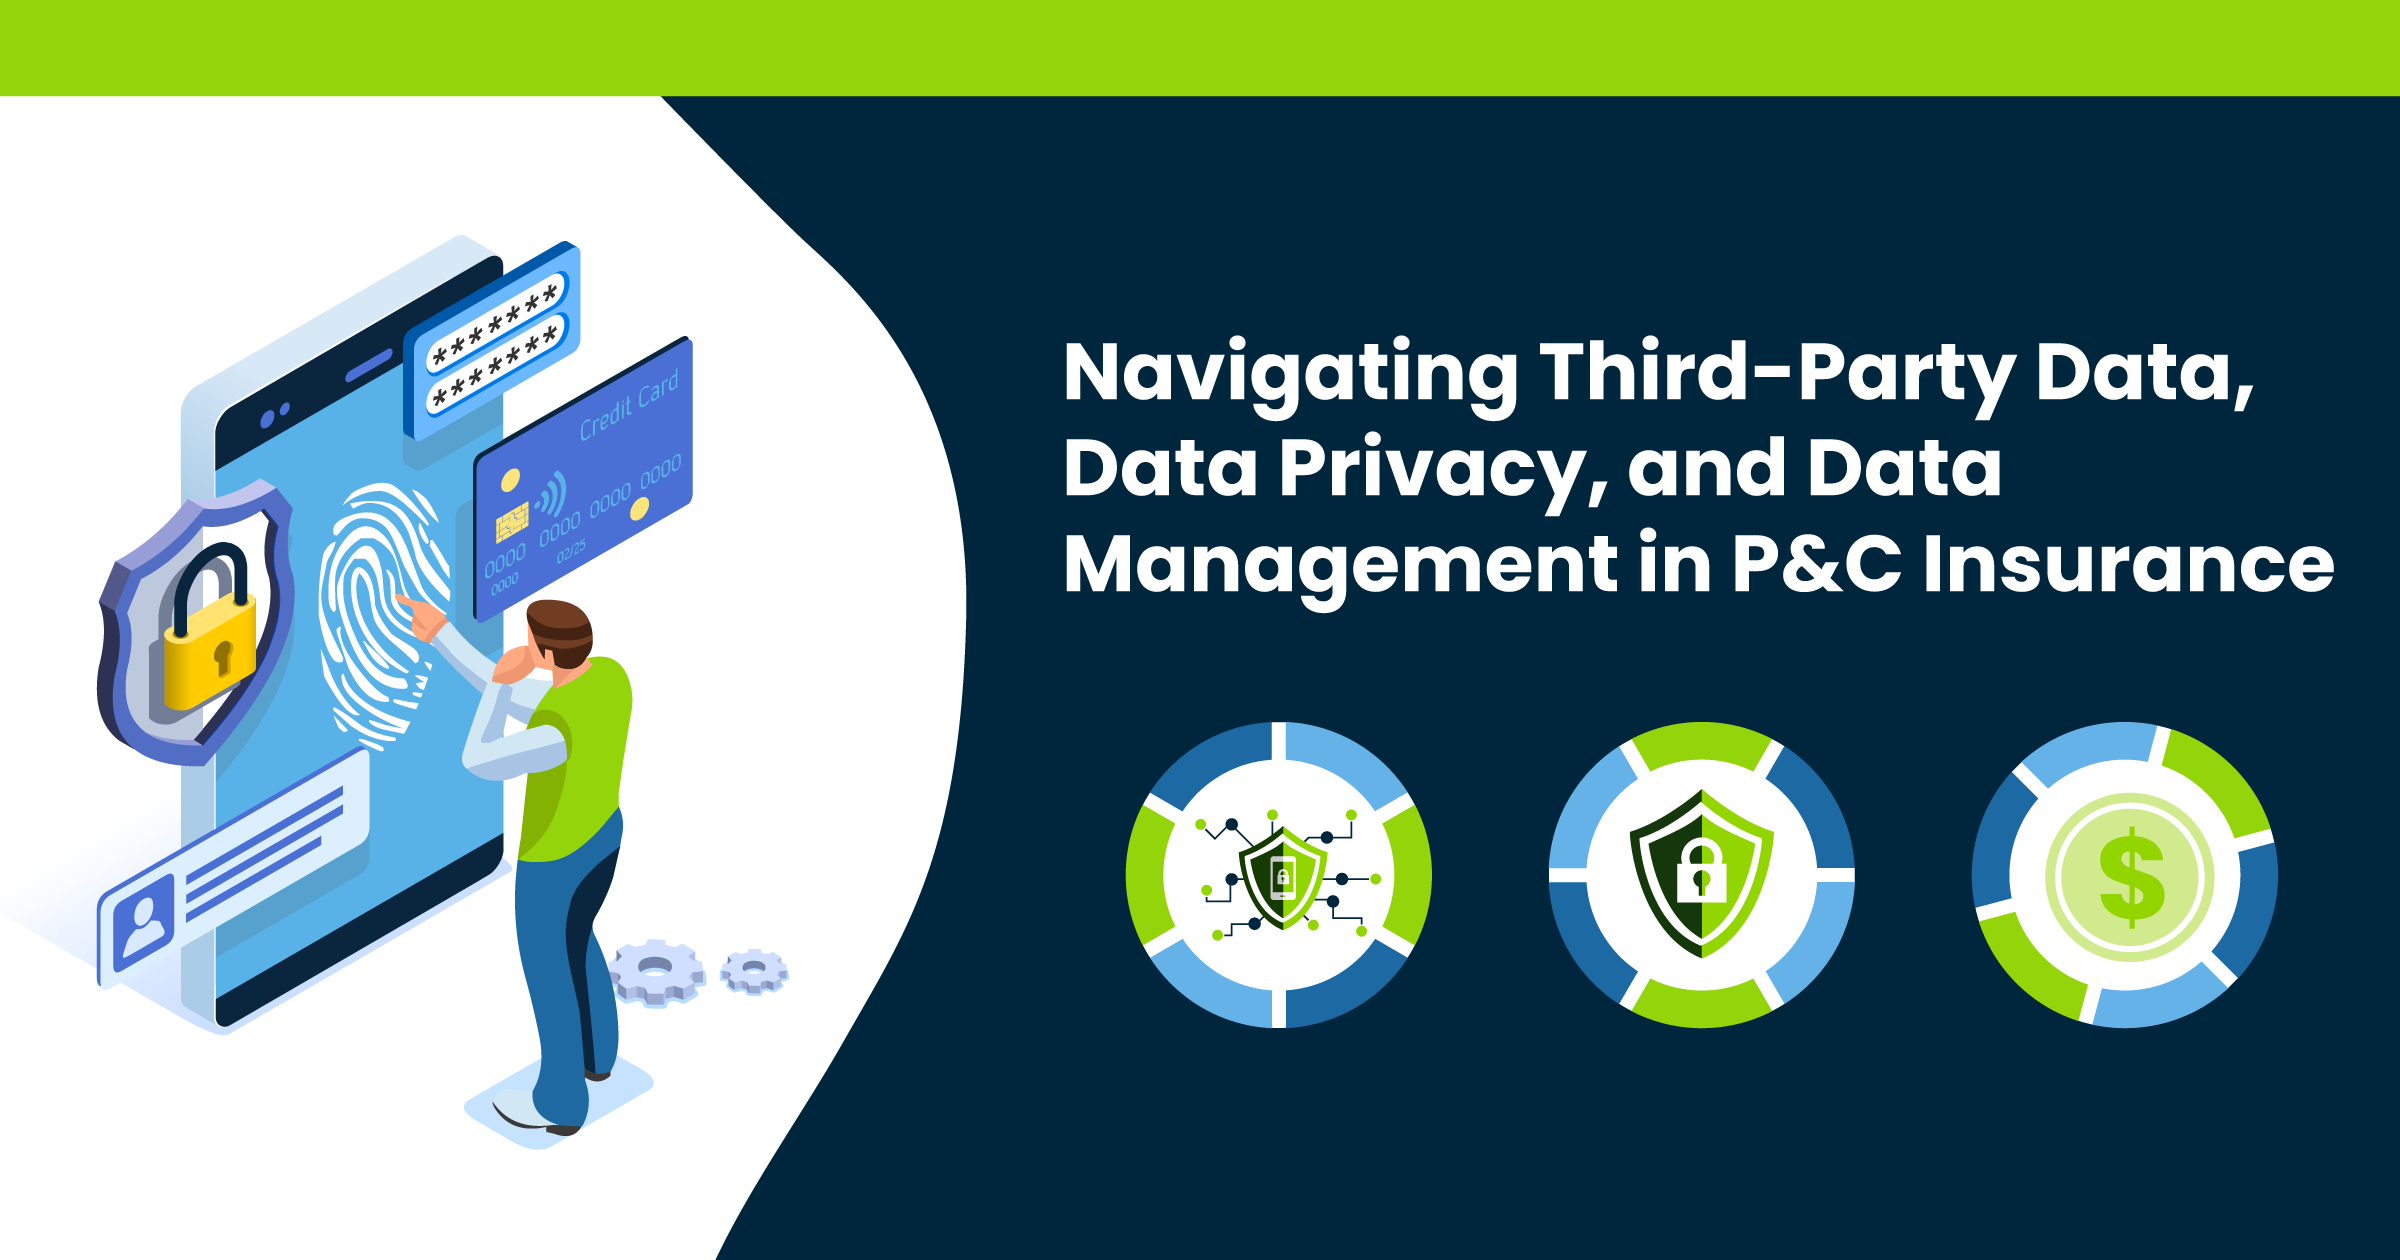 Navigating Third-Party Data, Data Privacy, and Data Management in P&C Insurance Illustration